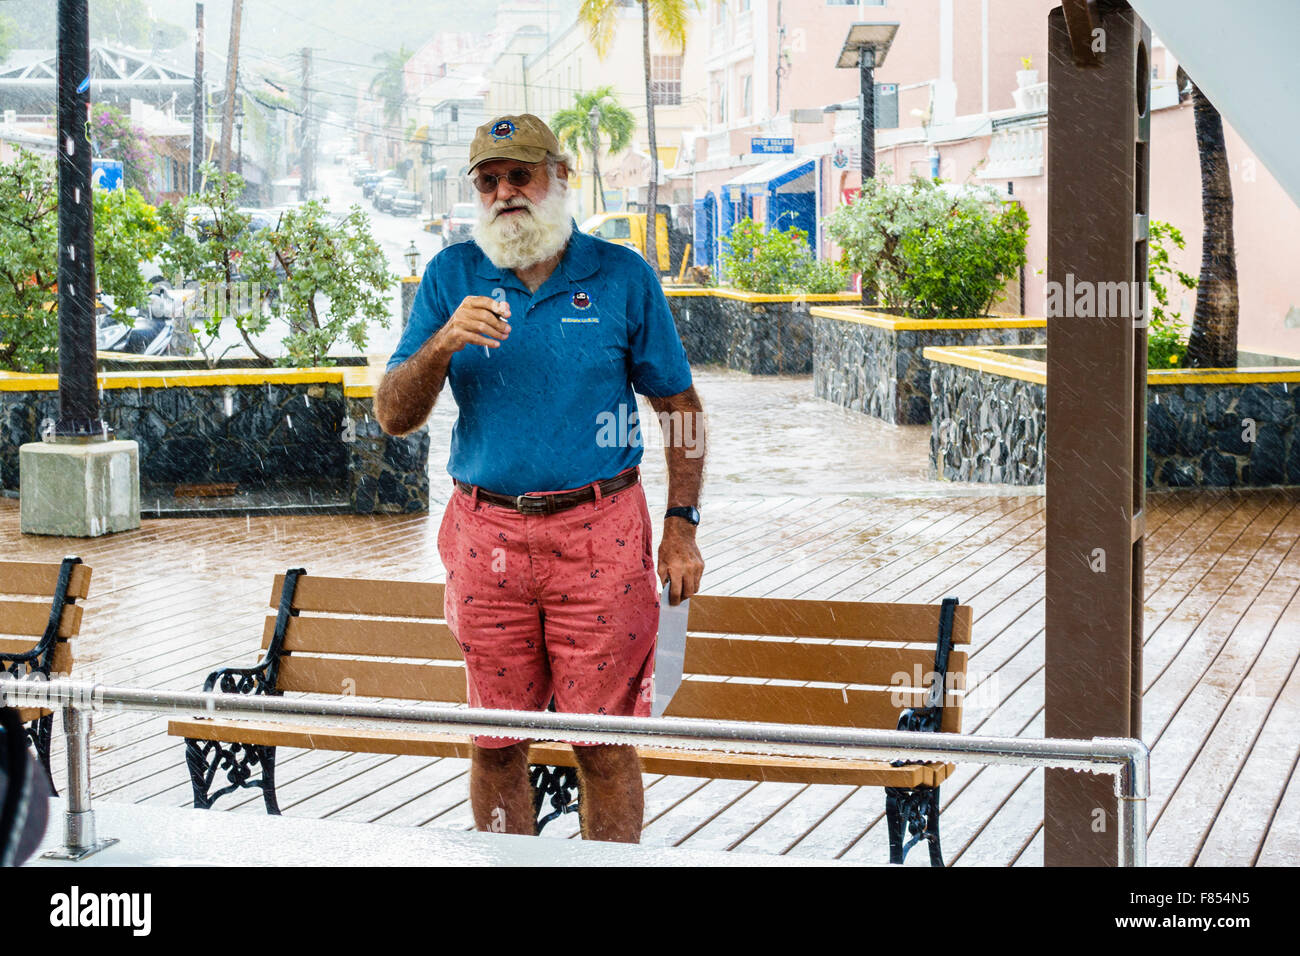 The owner of Big Beards Charter company in Christiansted, USVI, speaks to passengers before launching a boat during a heavy rain US Virgin Islands Stock Photo